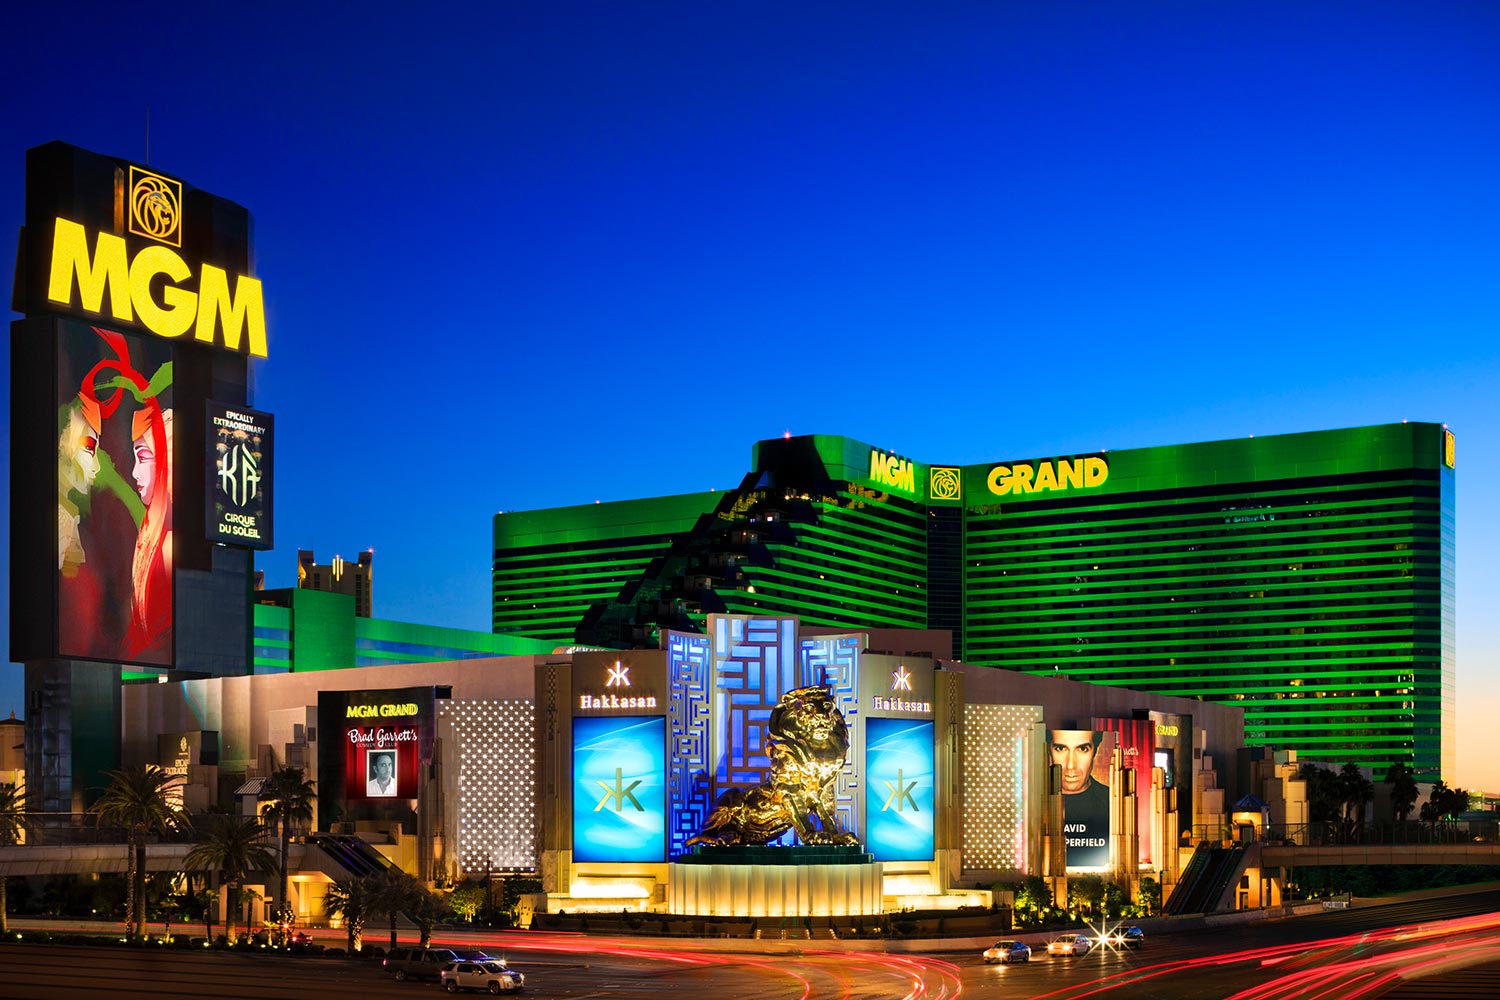 ocean resort casino bought by mgm